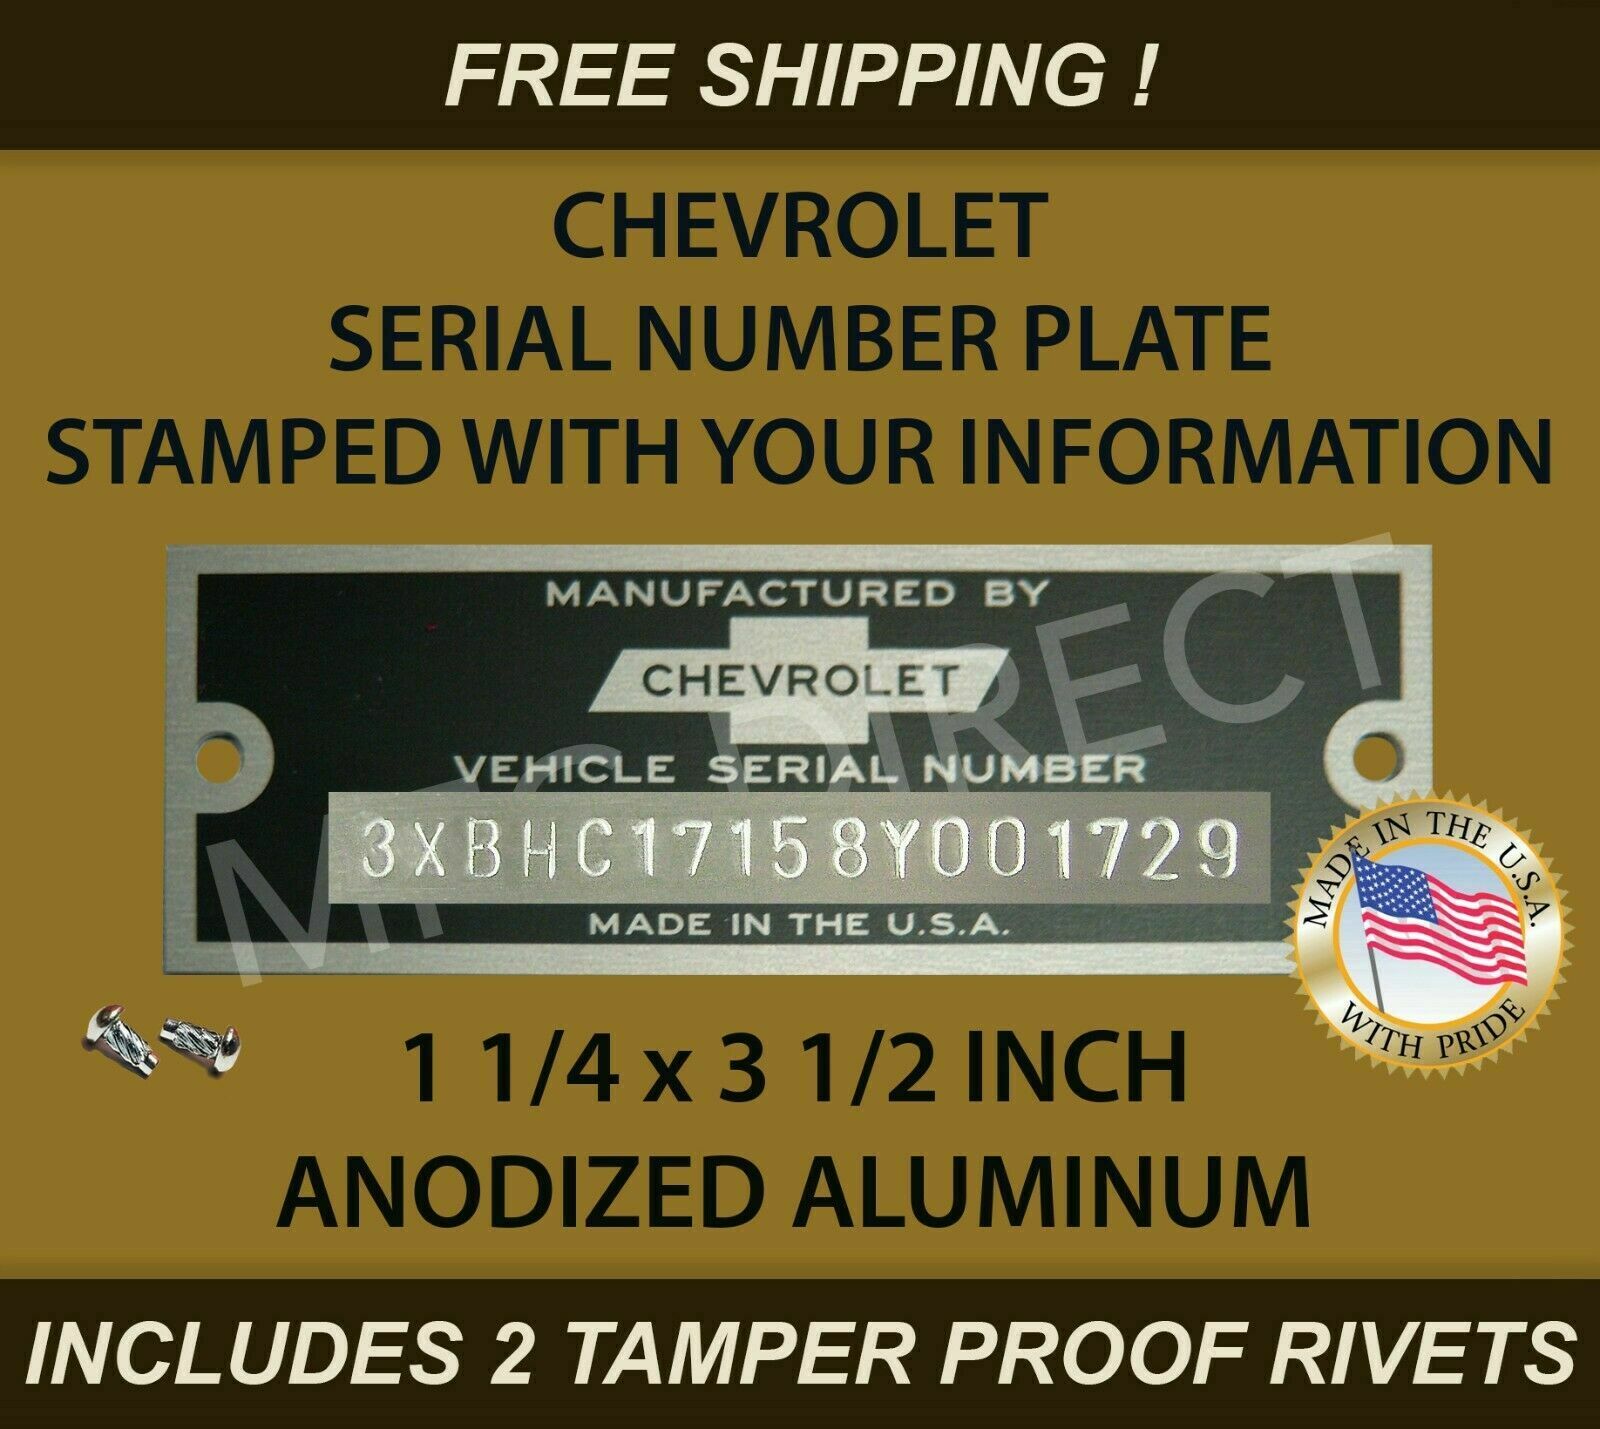 Chevy Chevrolet Serial Number Data Tag Id Plate Stamped With Your Information